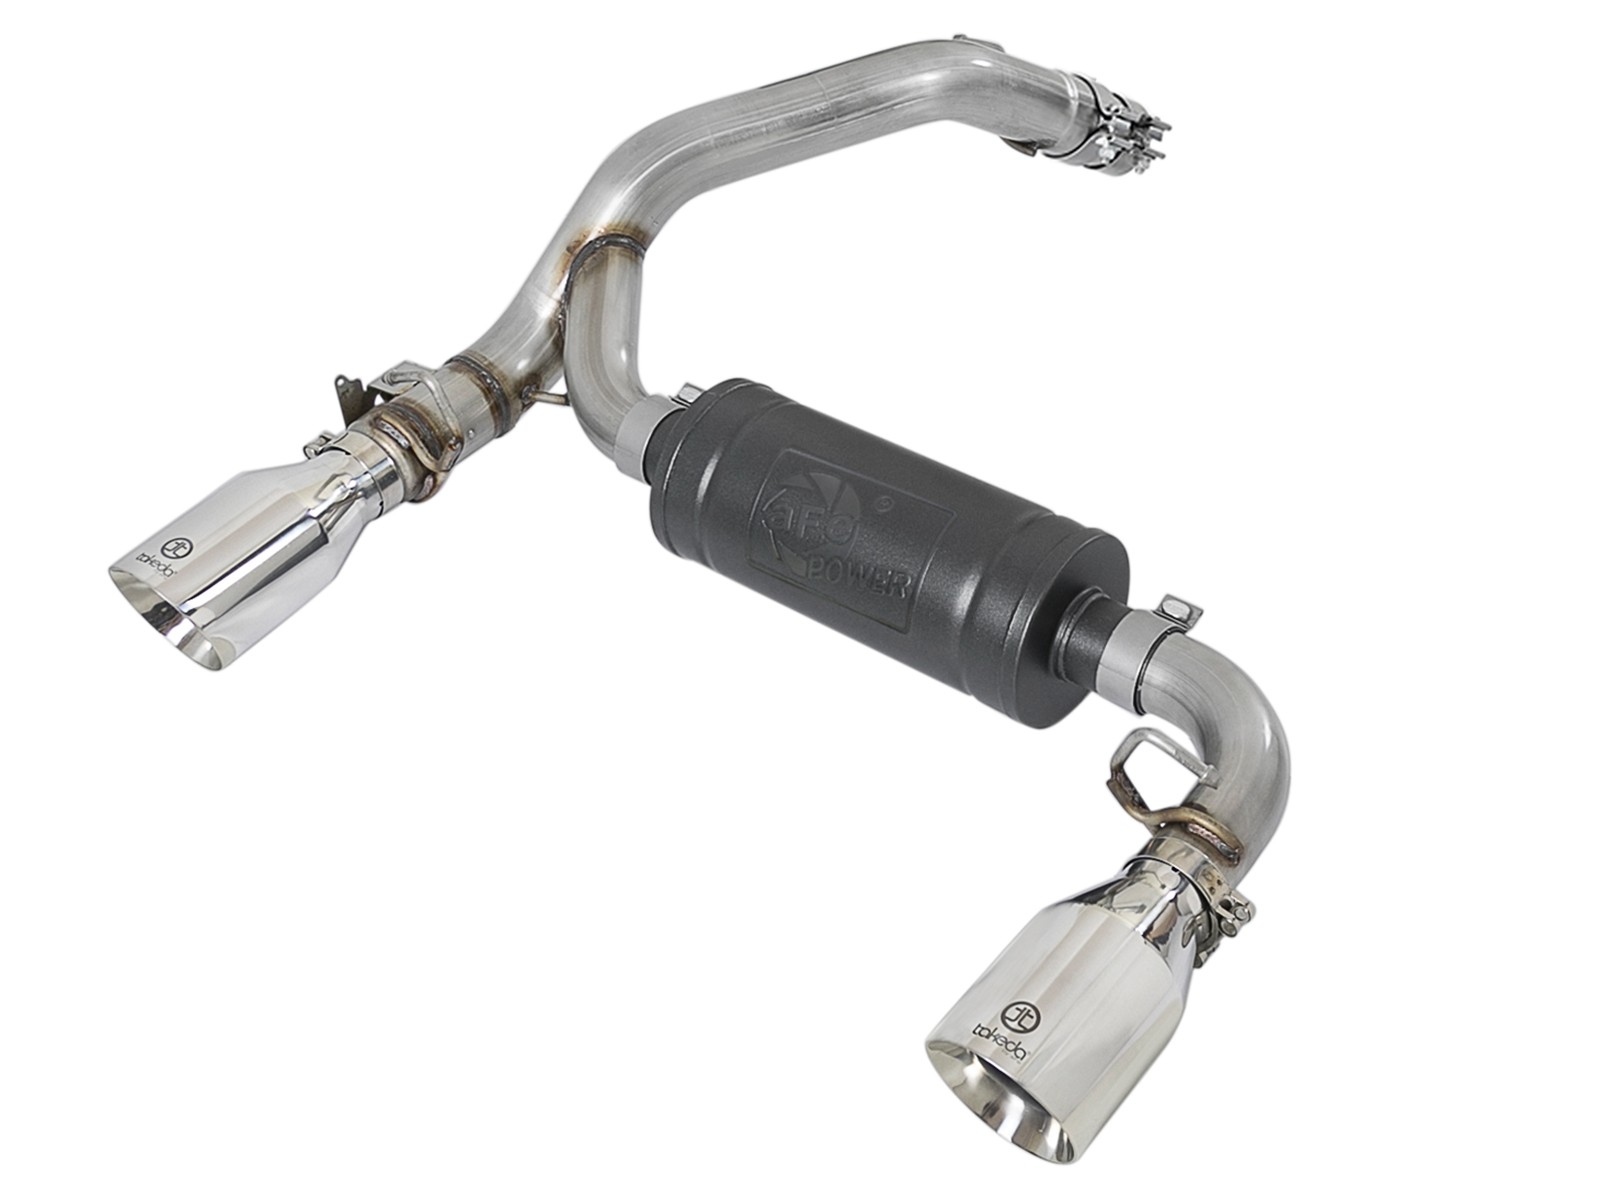 An axle-back style exhaust system